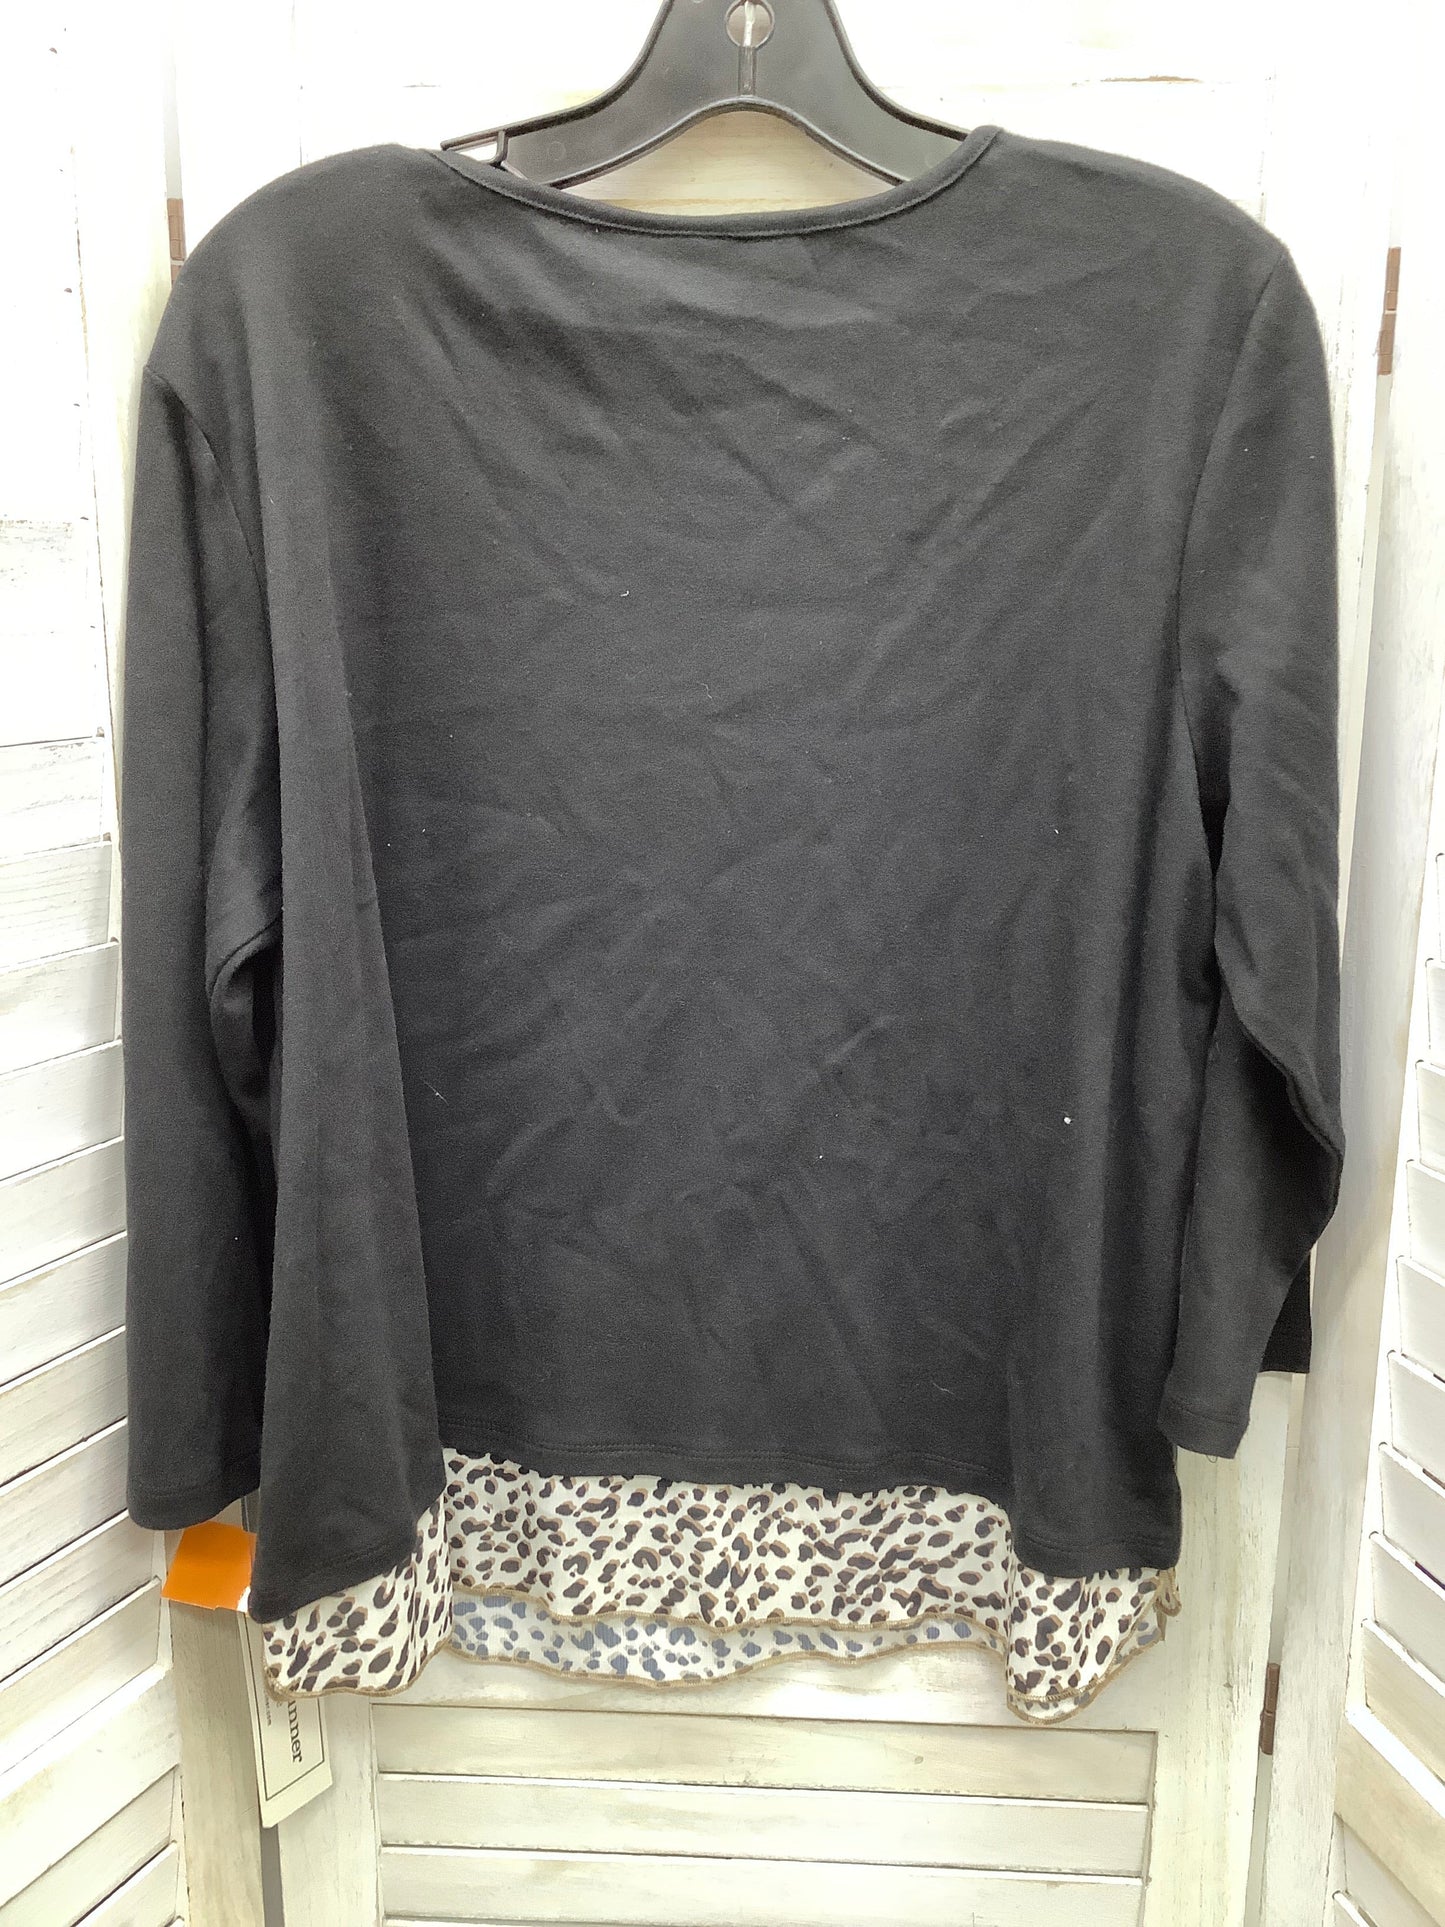 Animal Print Top Long Sleeve Alfred Dunner, Size L